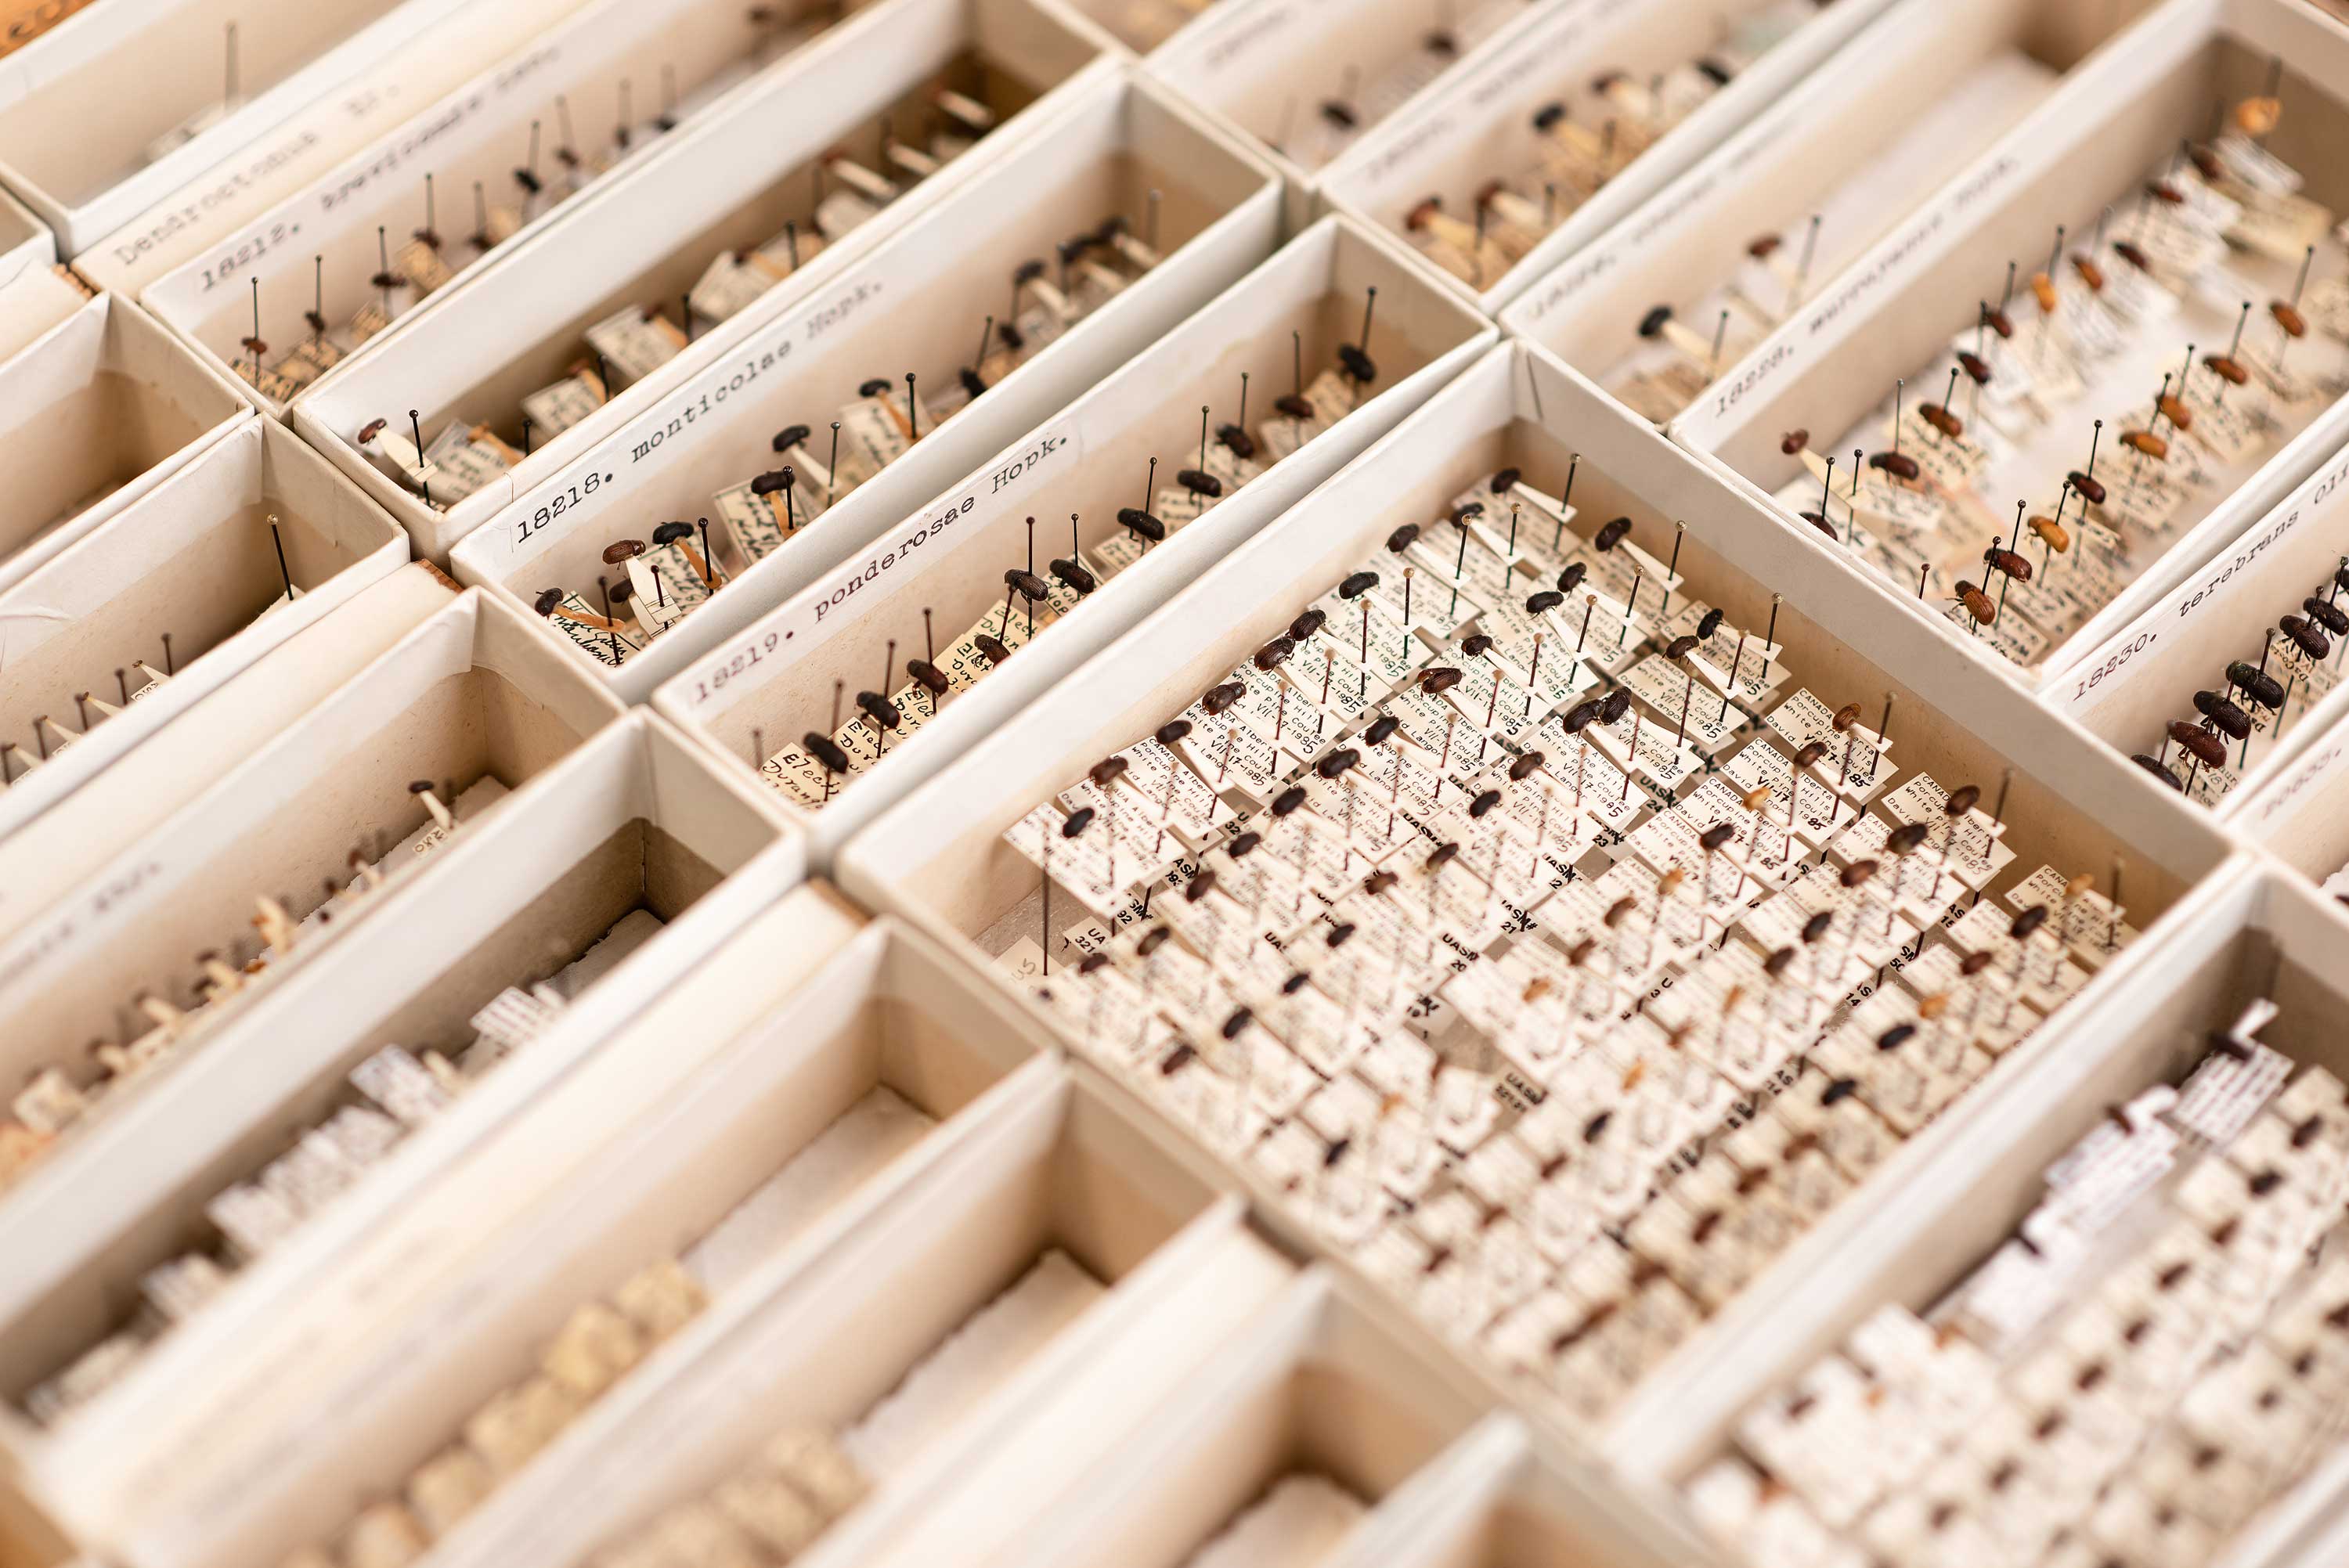 Beetle specimens displayed on pins inside white boxes with labels. 